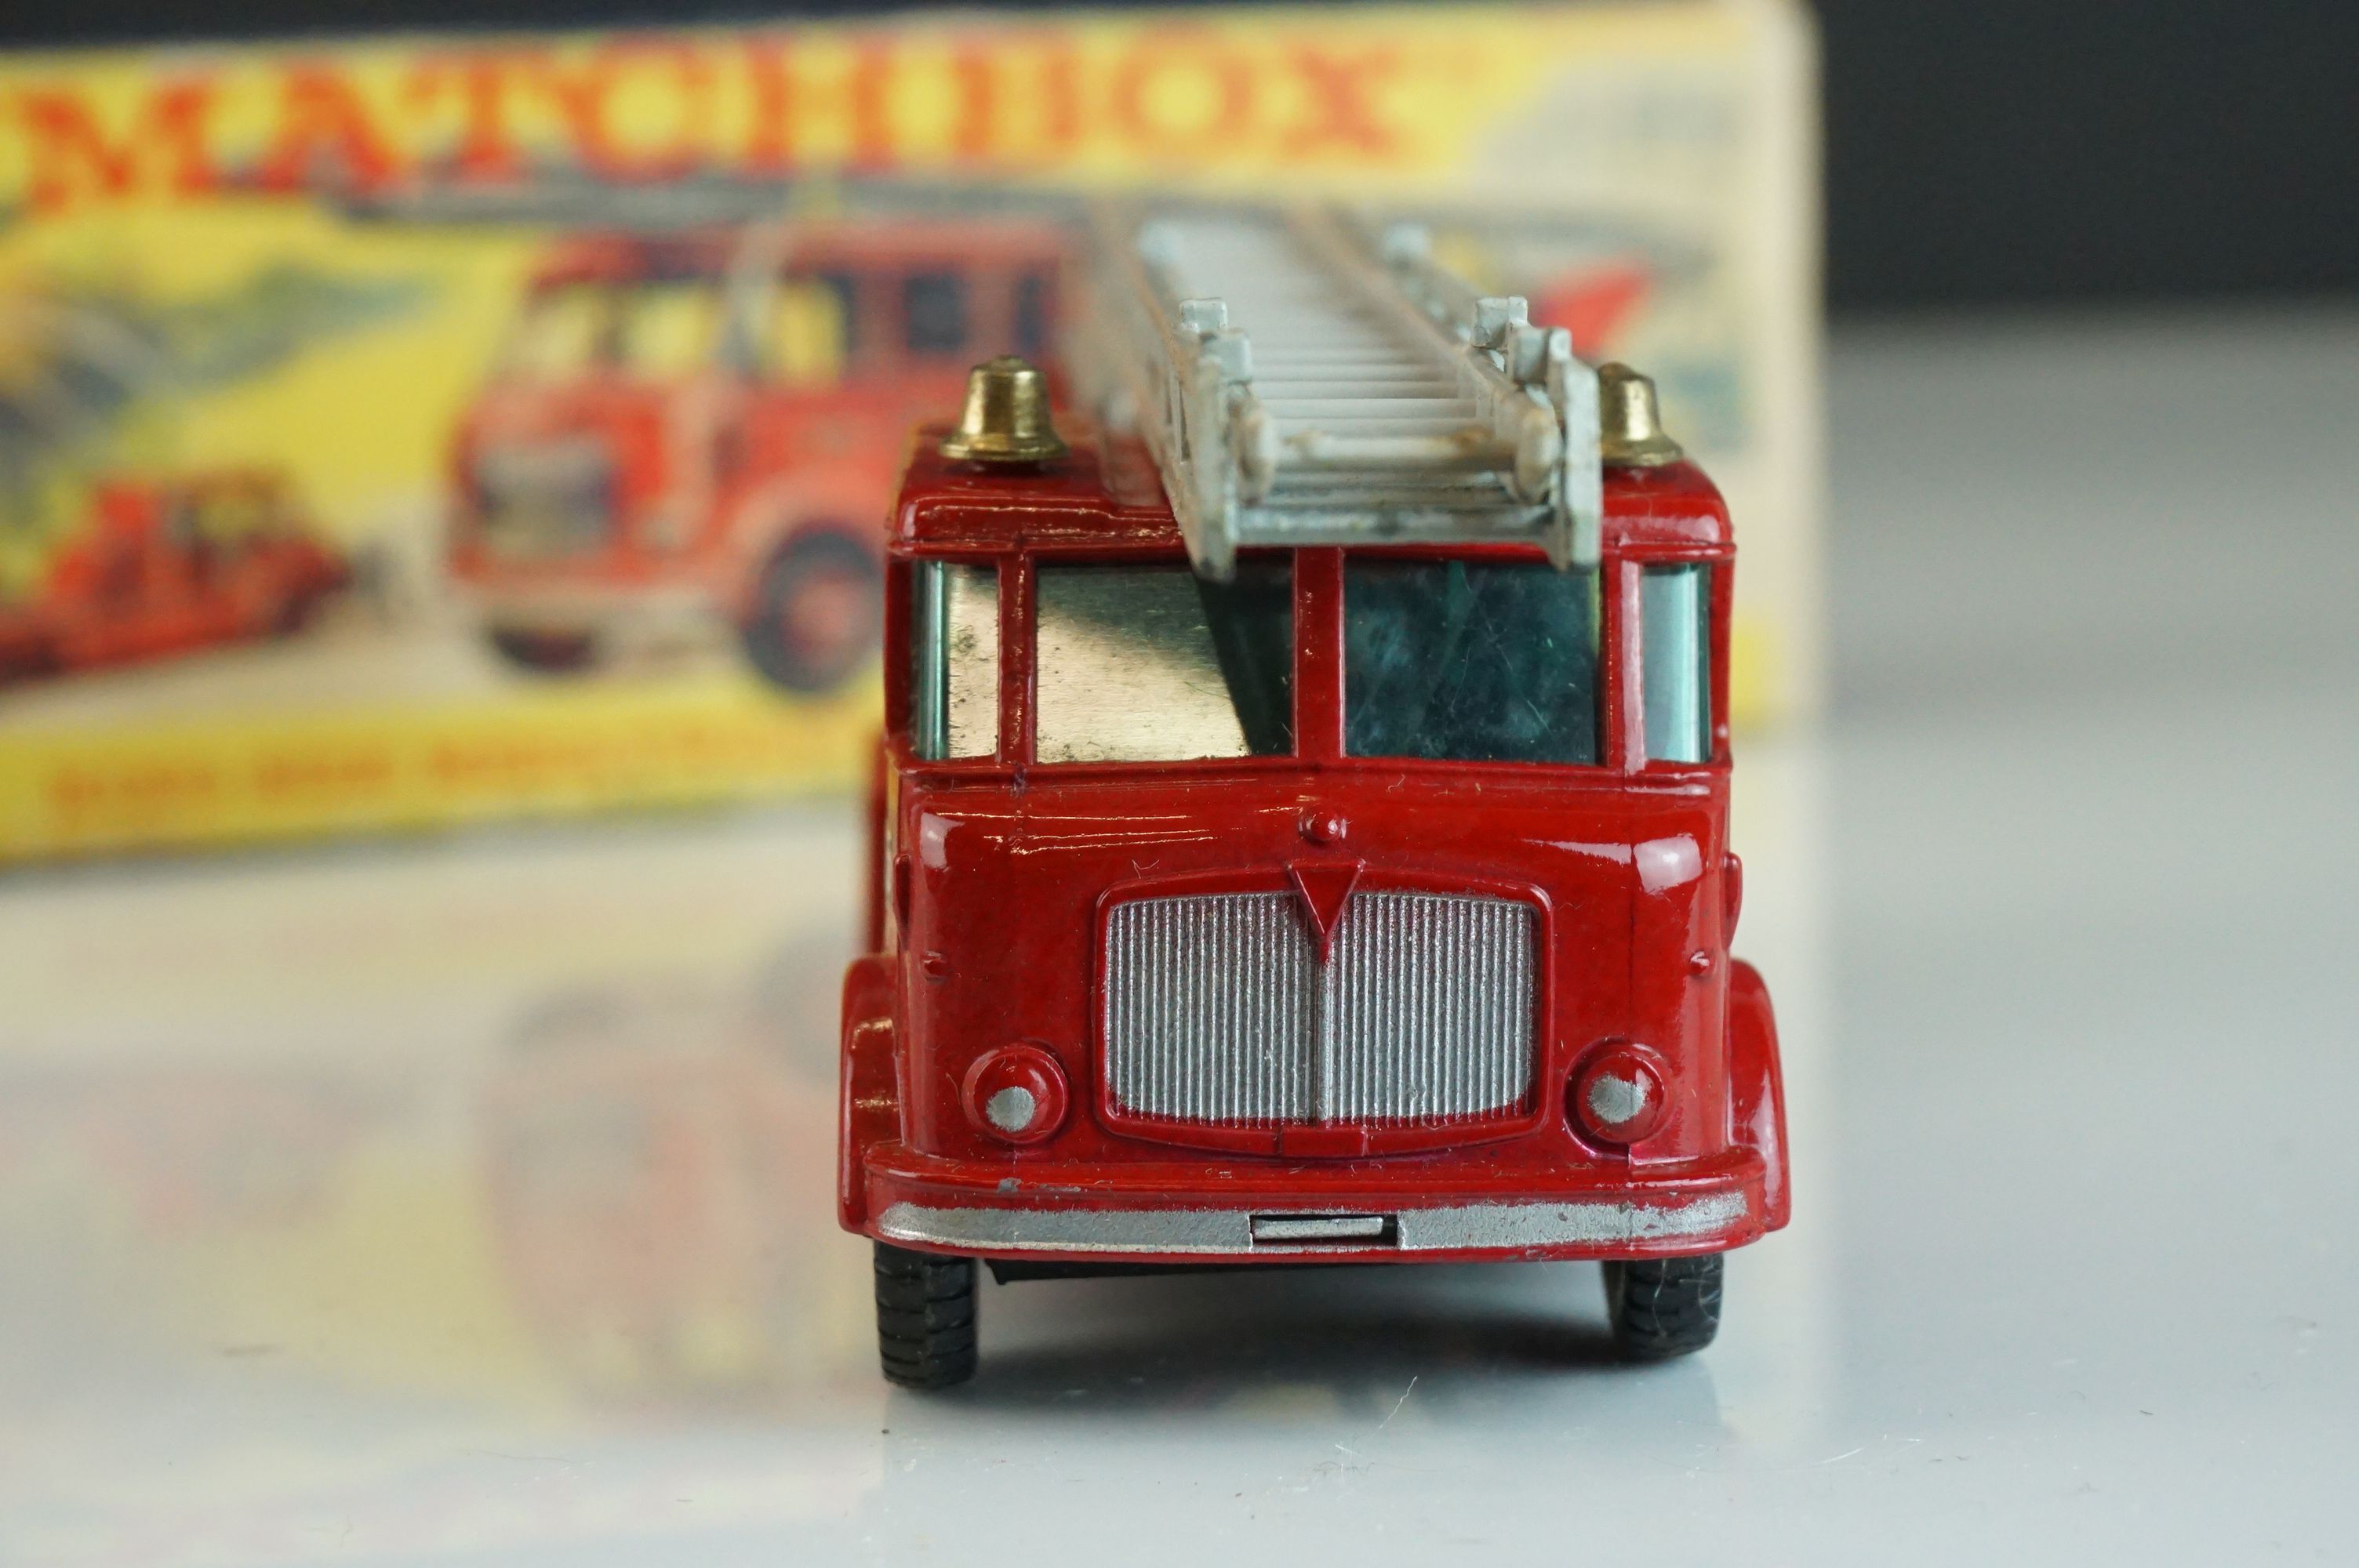 Boxed Matchbox K15 King Size Merryweather Fire Engine diecast model in vg condition with minimal - Image 3 of 8